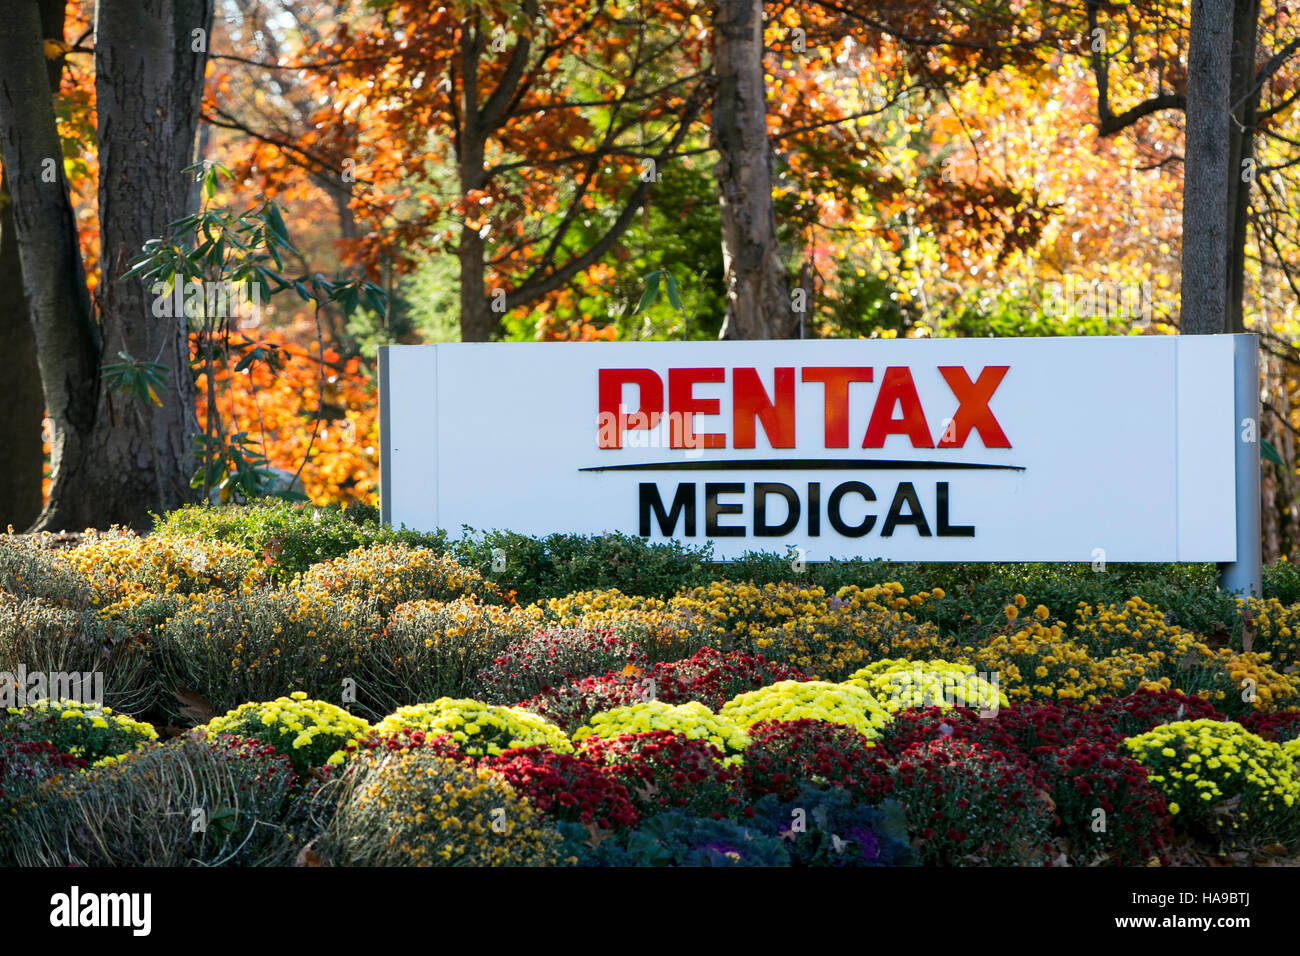 A logo sign outside of a facility occupied by PENTAX Medical in Montvale, New Jersey on November 5, 2016. Stock Photo